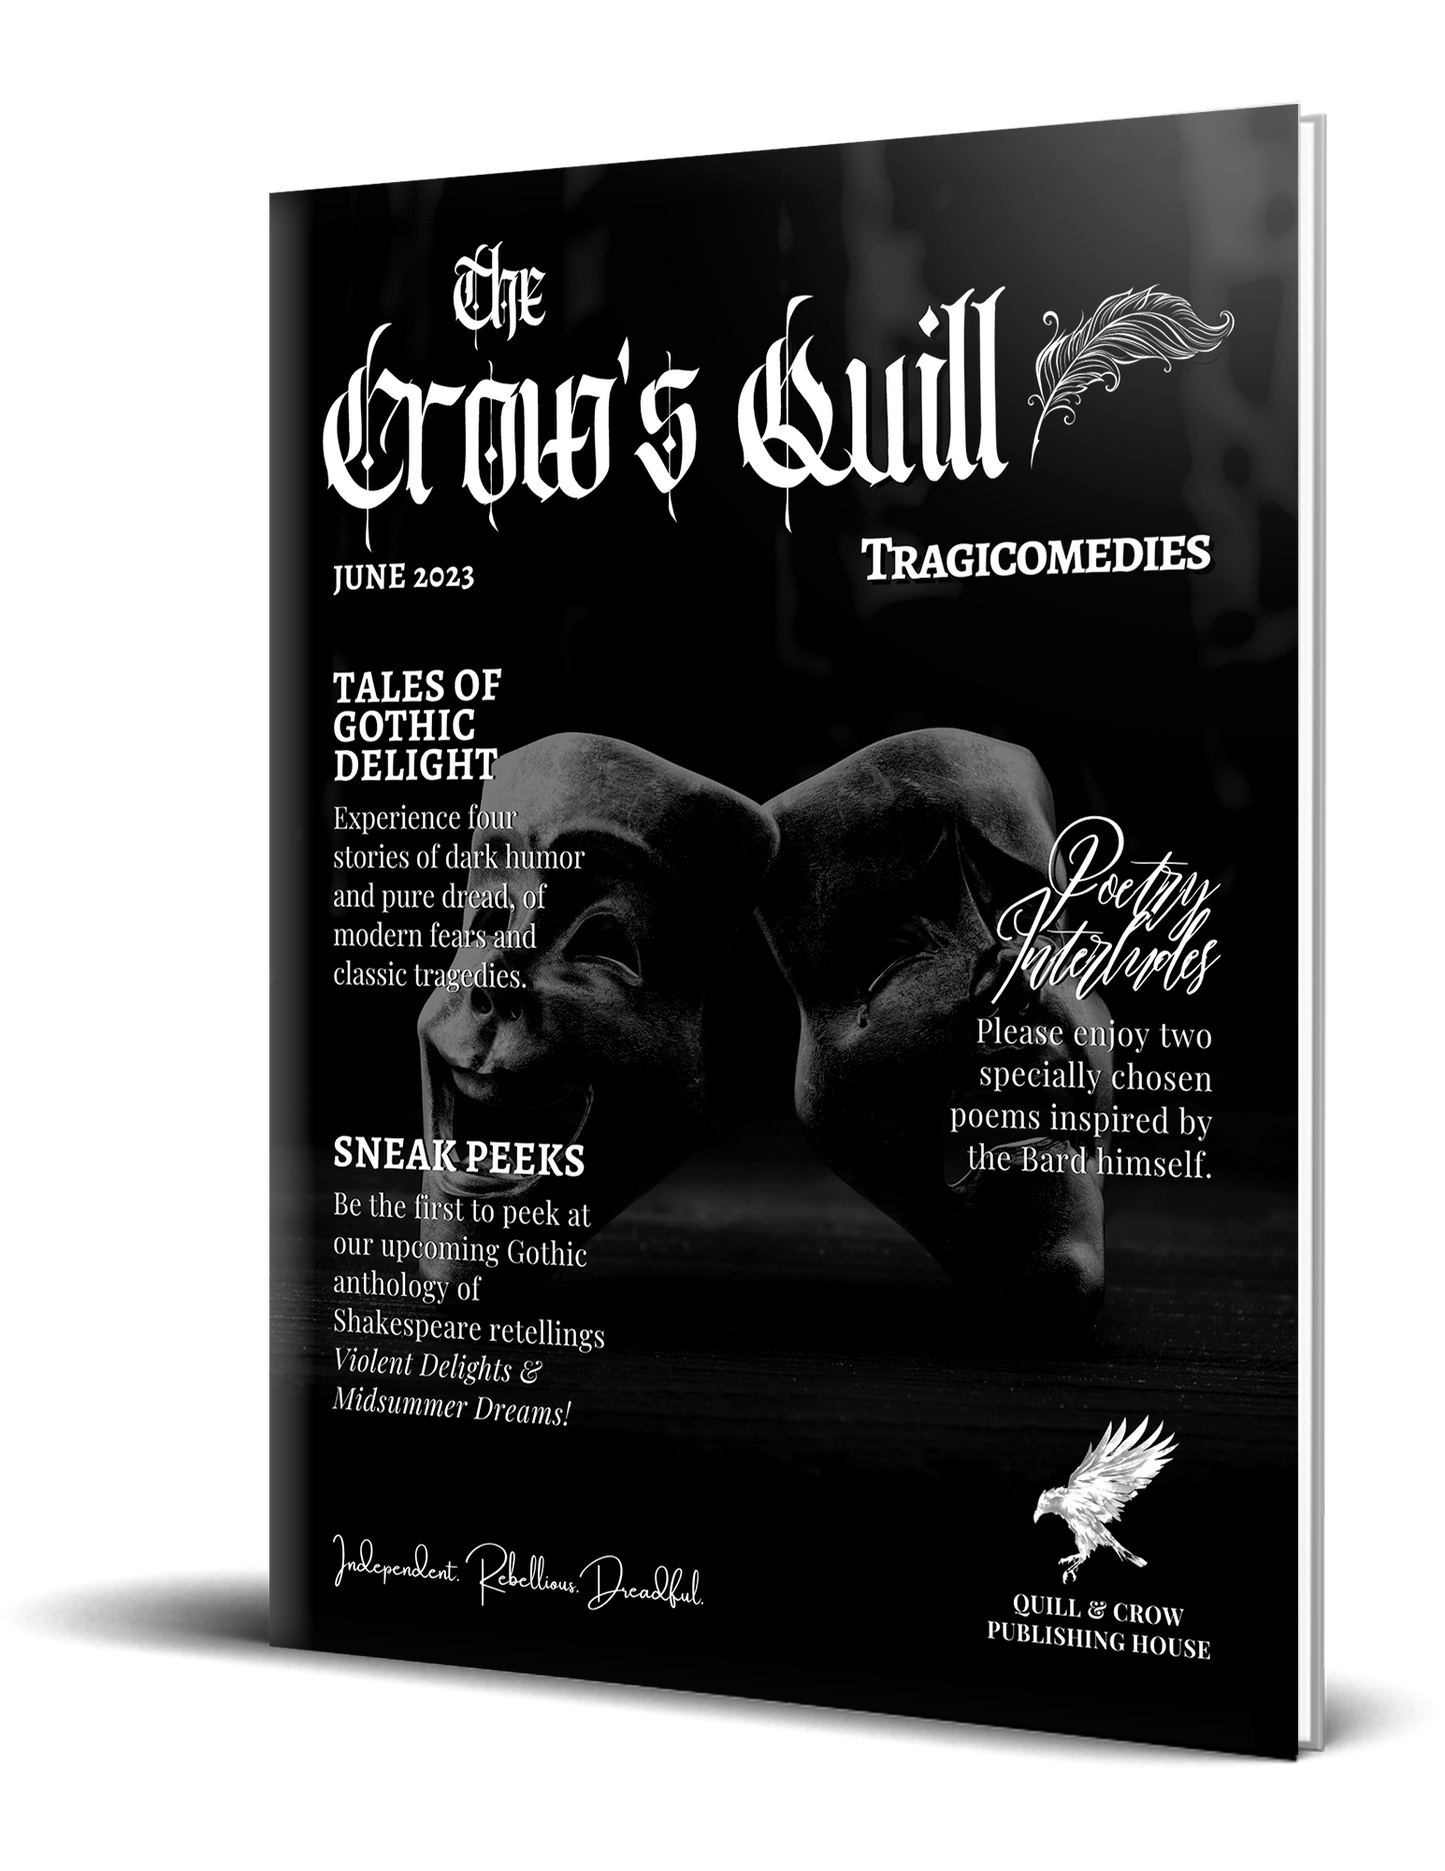 The Crow's Quill Magazine: Issue 23